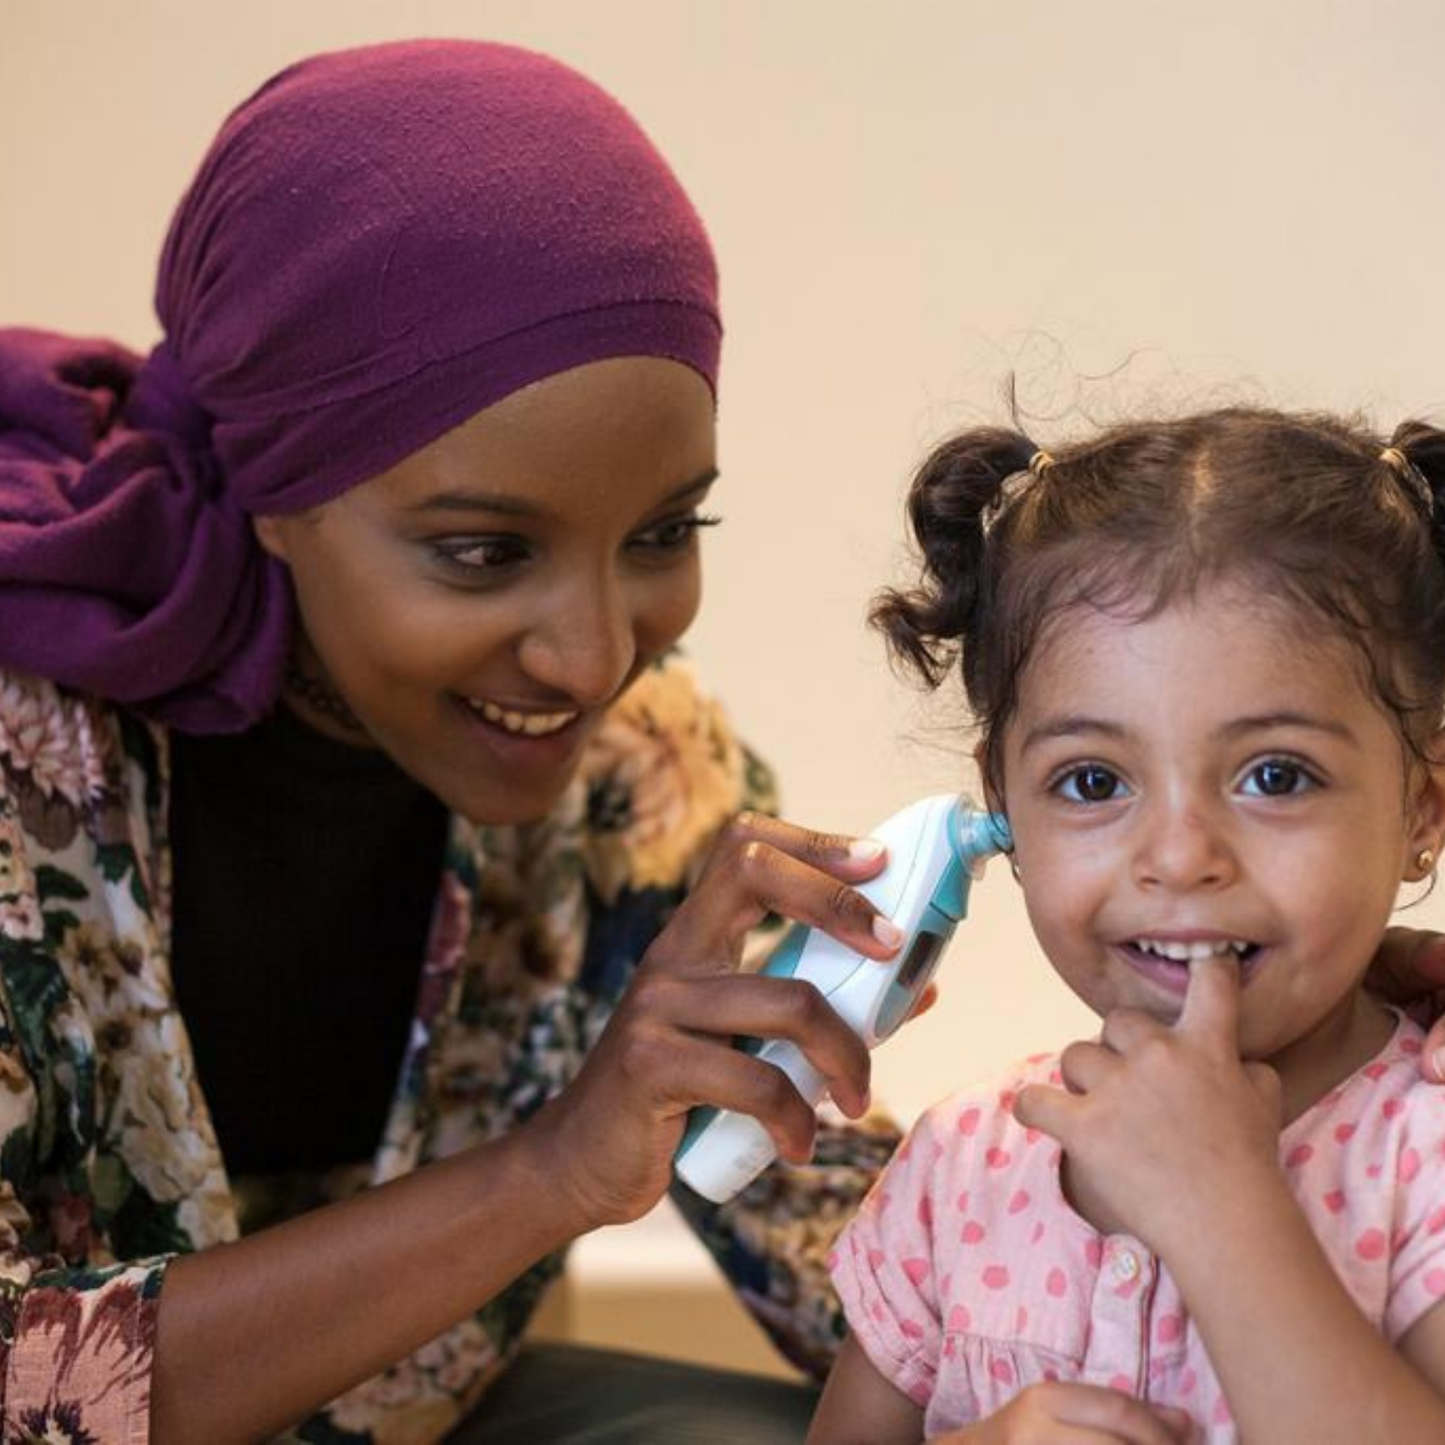 A smiling young girl getting her in ear tempterature check by a woman wearing a headscarf. They are both smiling and the girl has her hair tied up in two ponytails.